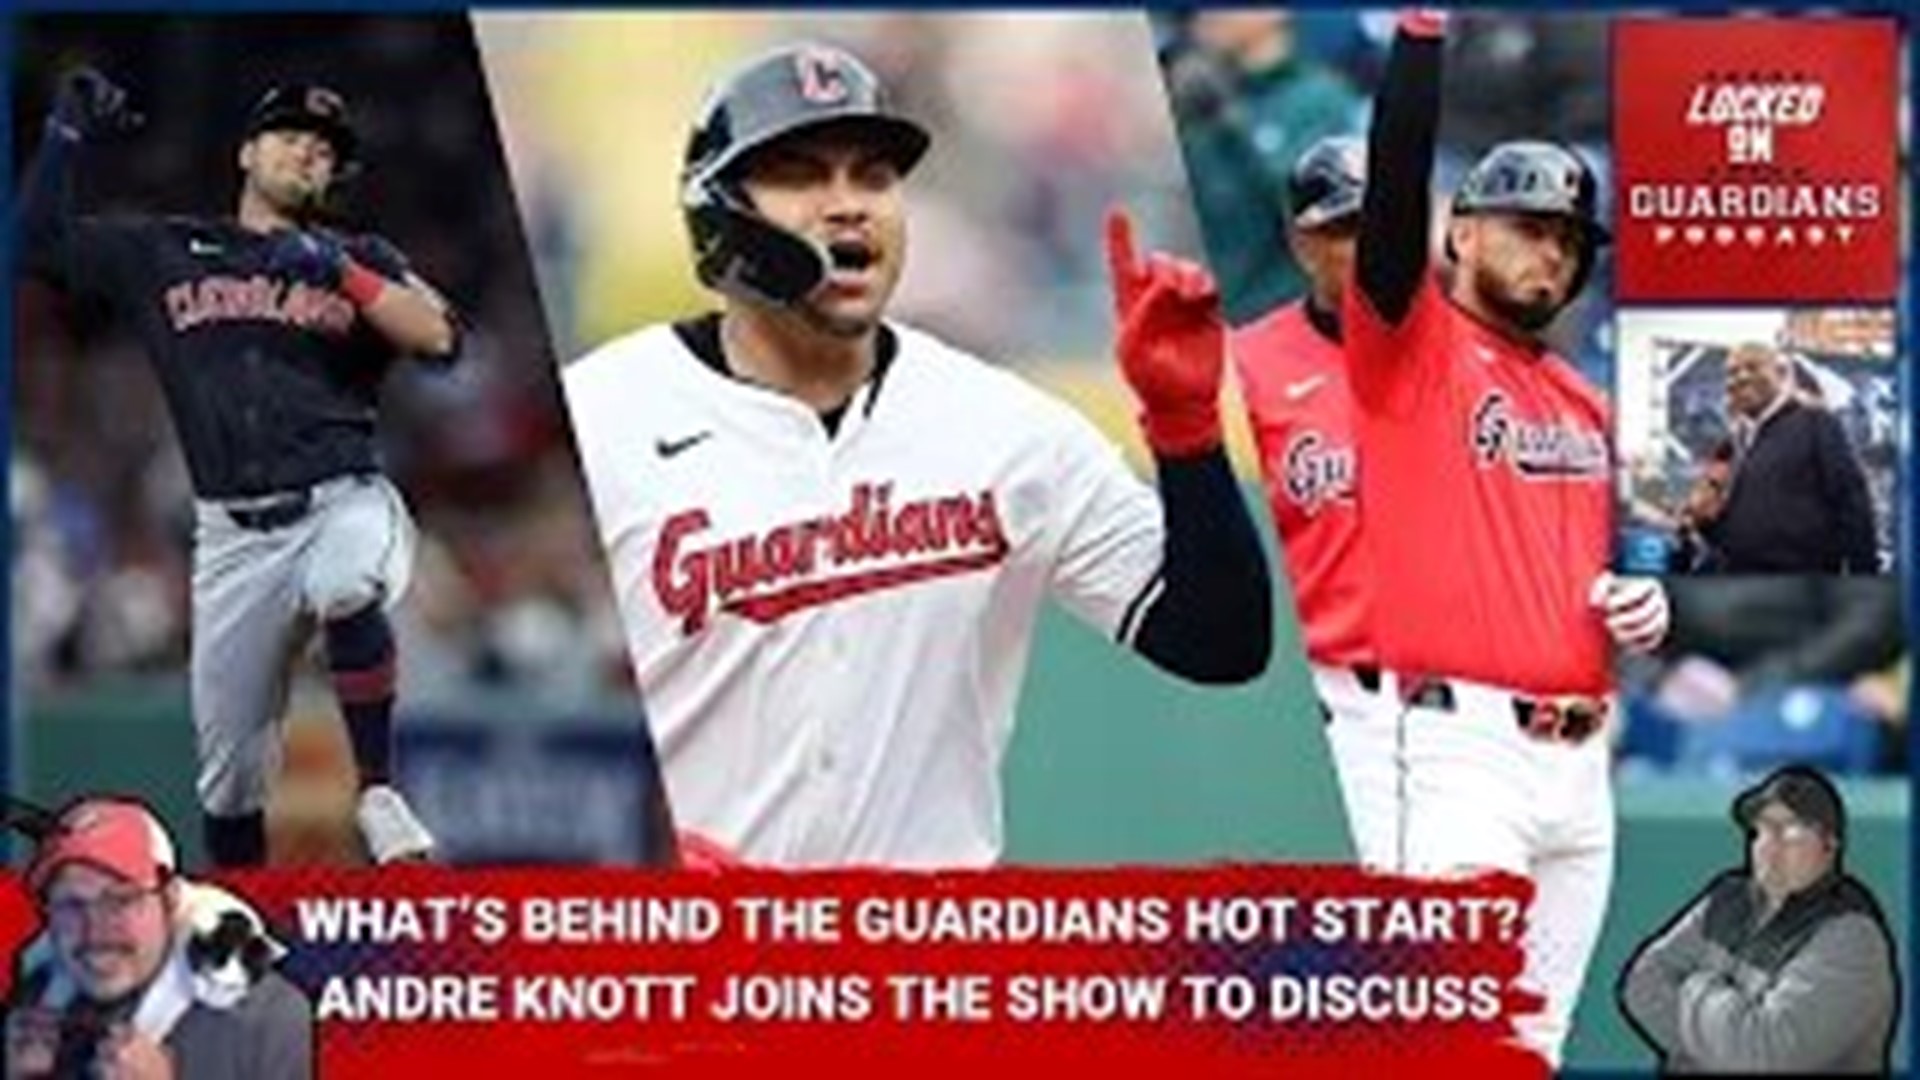 The Cleveland Guardians are 16-6 through 22 games in 2024 and life is good. So what is behind the Guardians great start? Friend of the show Andre Knott joins us!